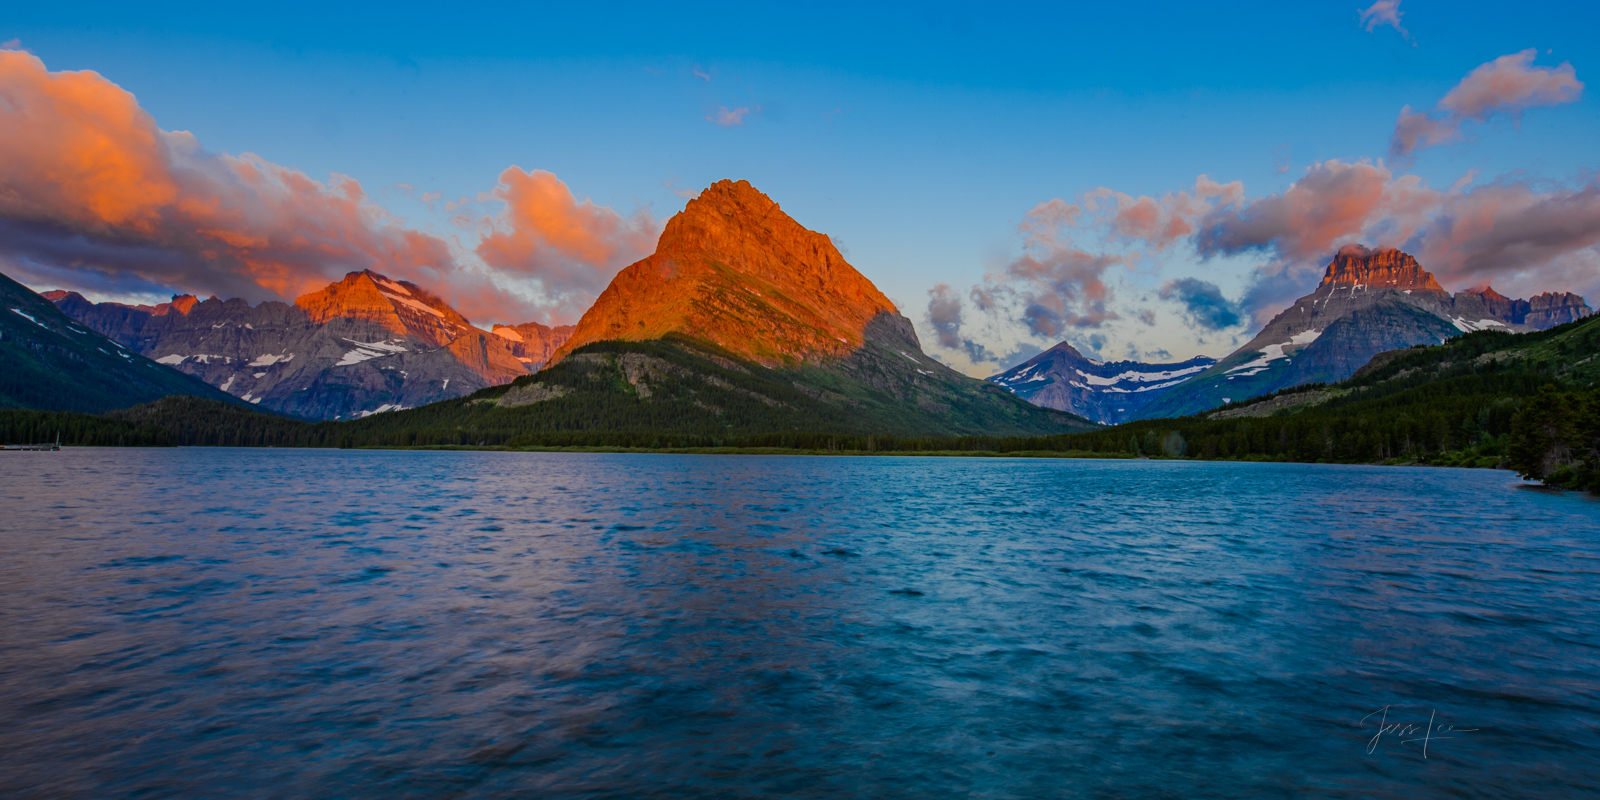 Morning Chill a Picture of Glacier National Park. A fine Art Limited Edition Print of sunset at Glacier. Order yours today and...